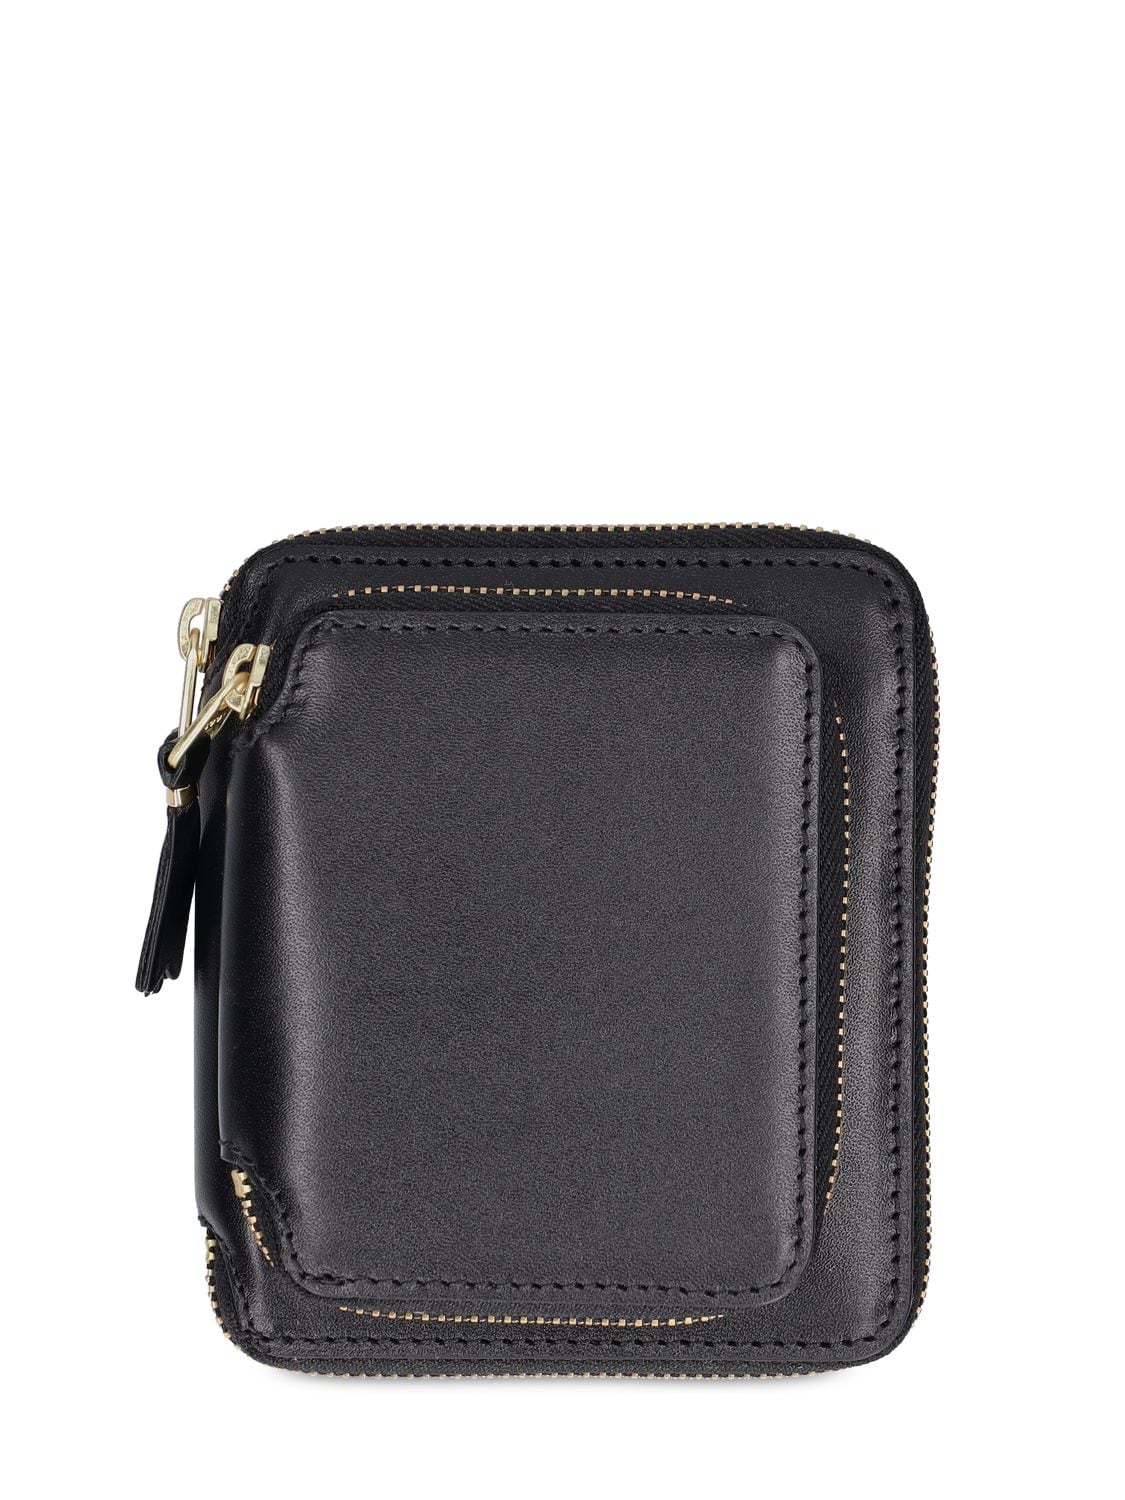 Image of Classic Leather Double-zip Wallet